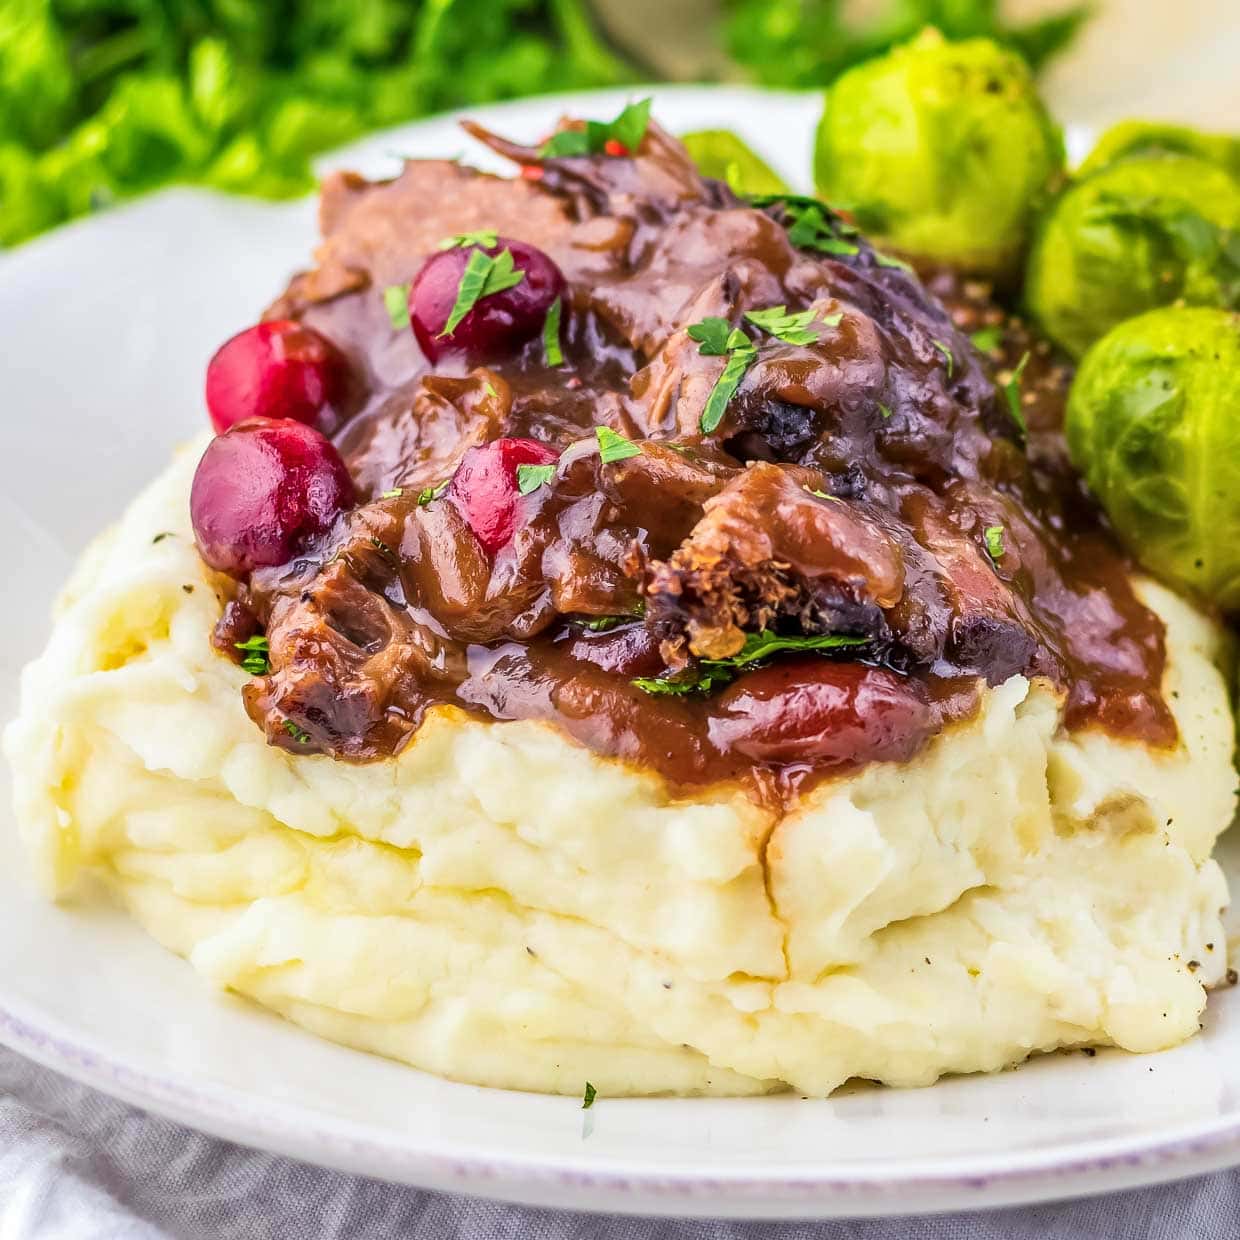 A plate with mashed potatoes, gravy and brussels sprouts.